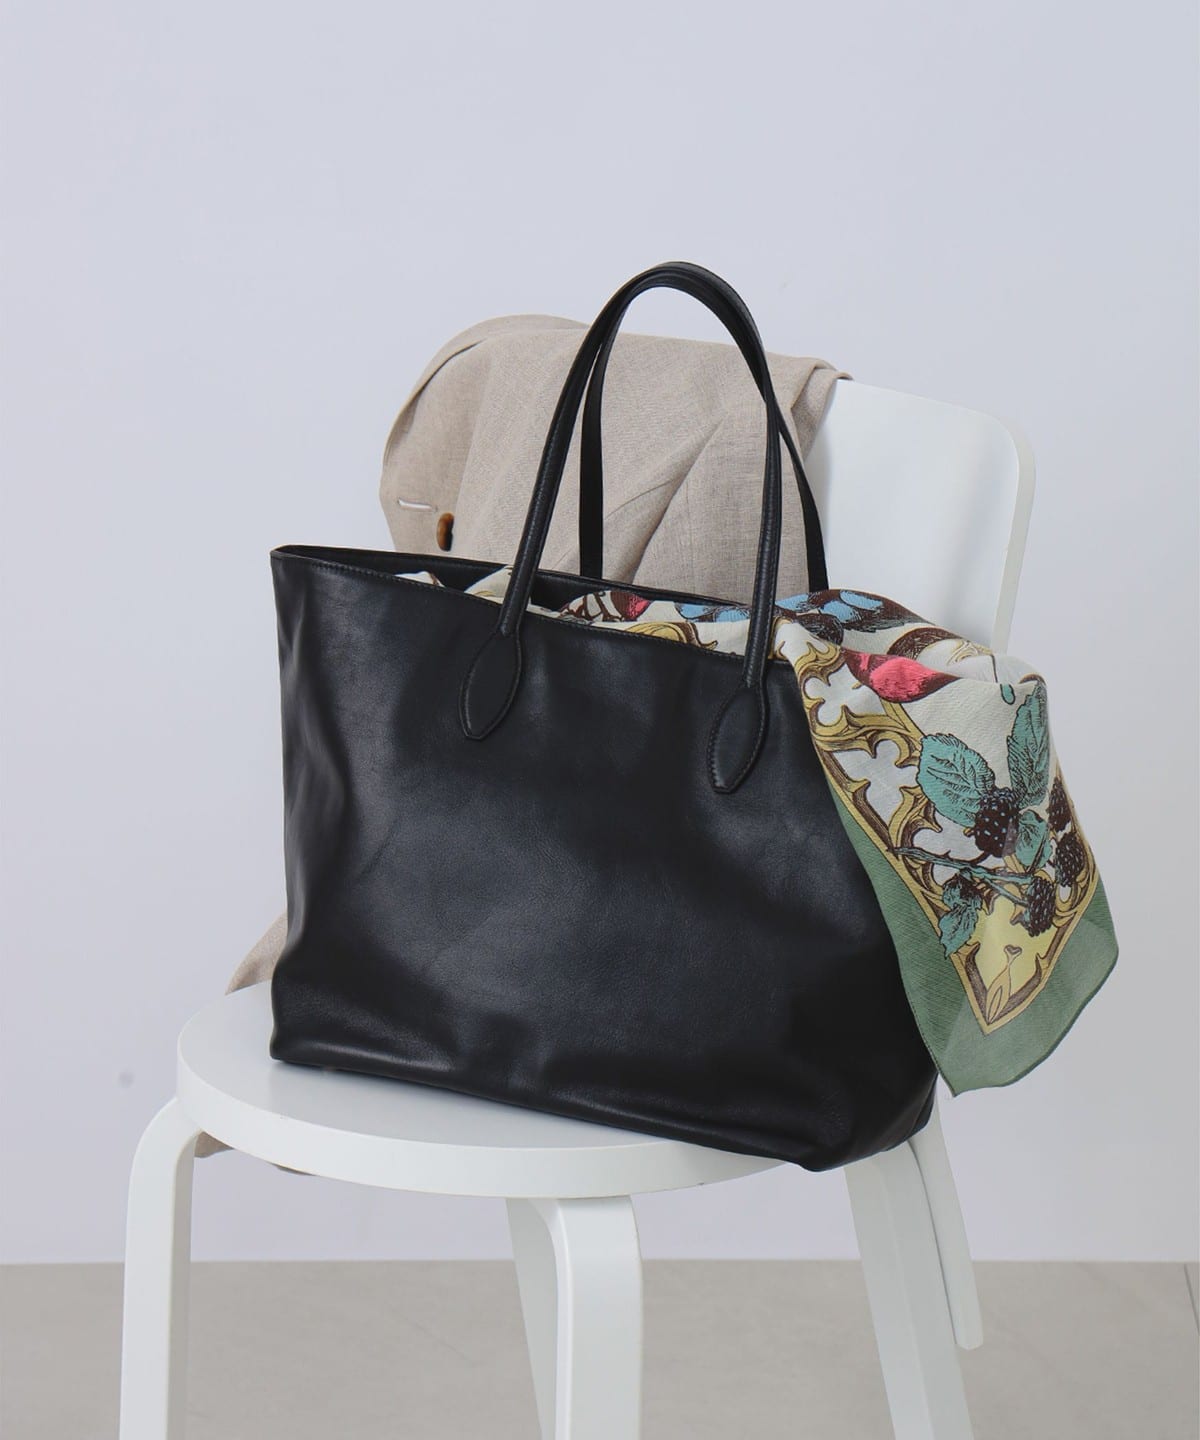 Demi-Luxe BEAMS Demi-Luxe BEAMS Demi-Luxe BEAMS / Leather tote bag